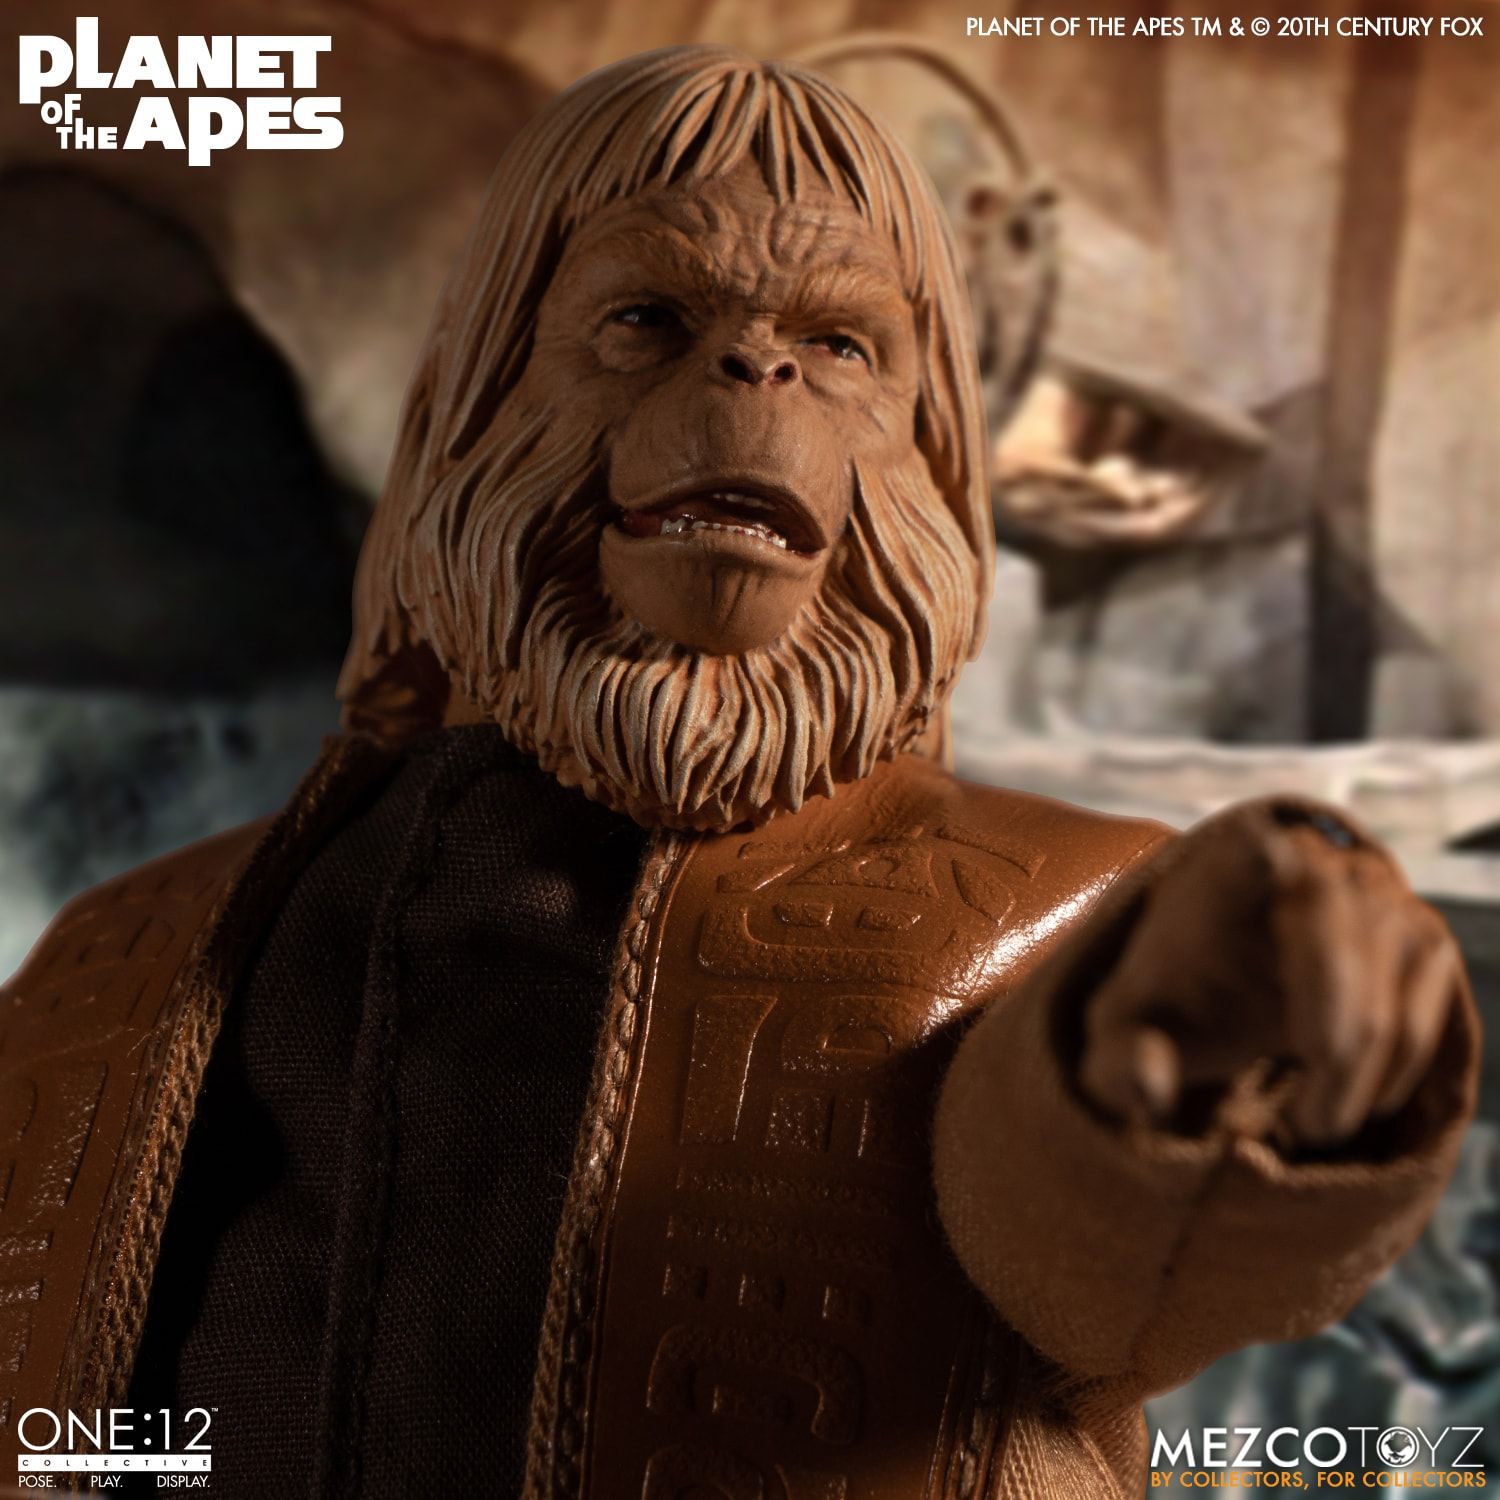 Mezco - One:12 Collective - Planet of the Apes (1968) - Dr. Zaius - Marvelous Toys